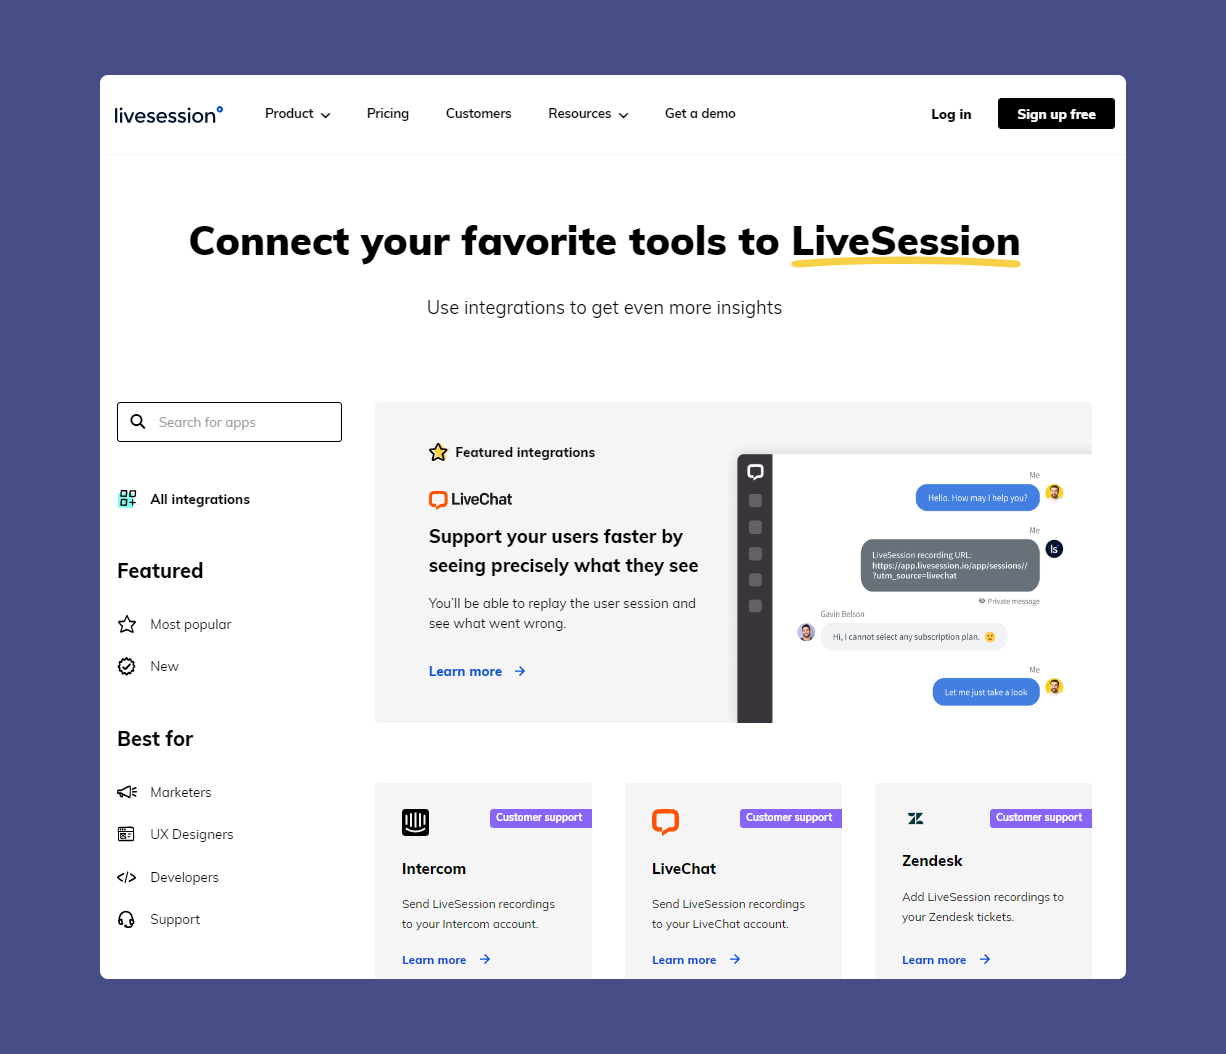 LiveSession’s integrations